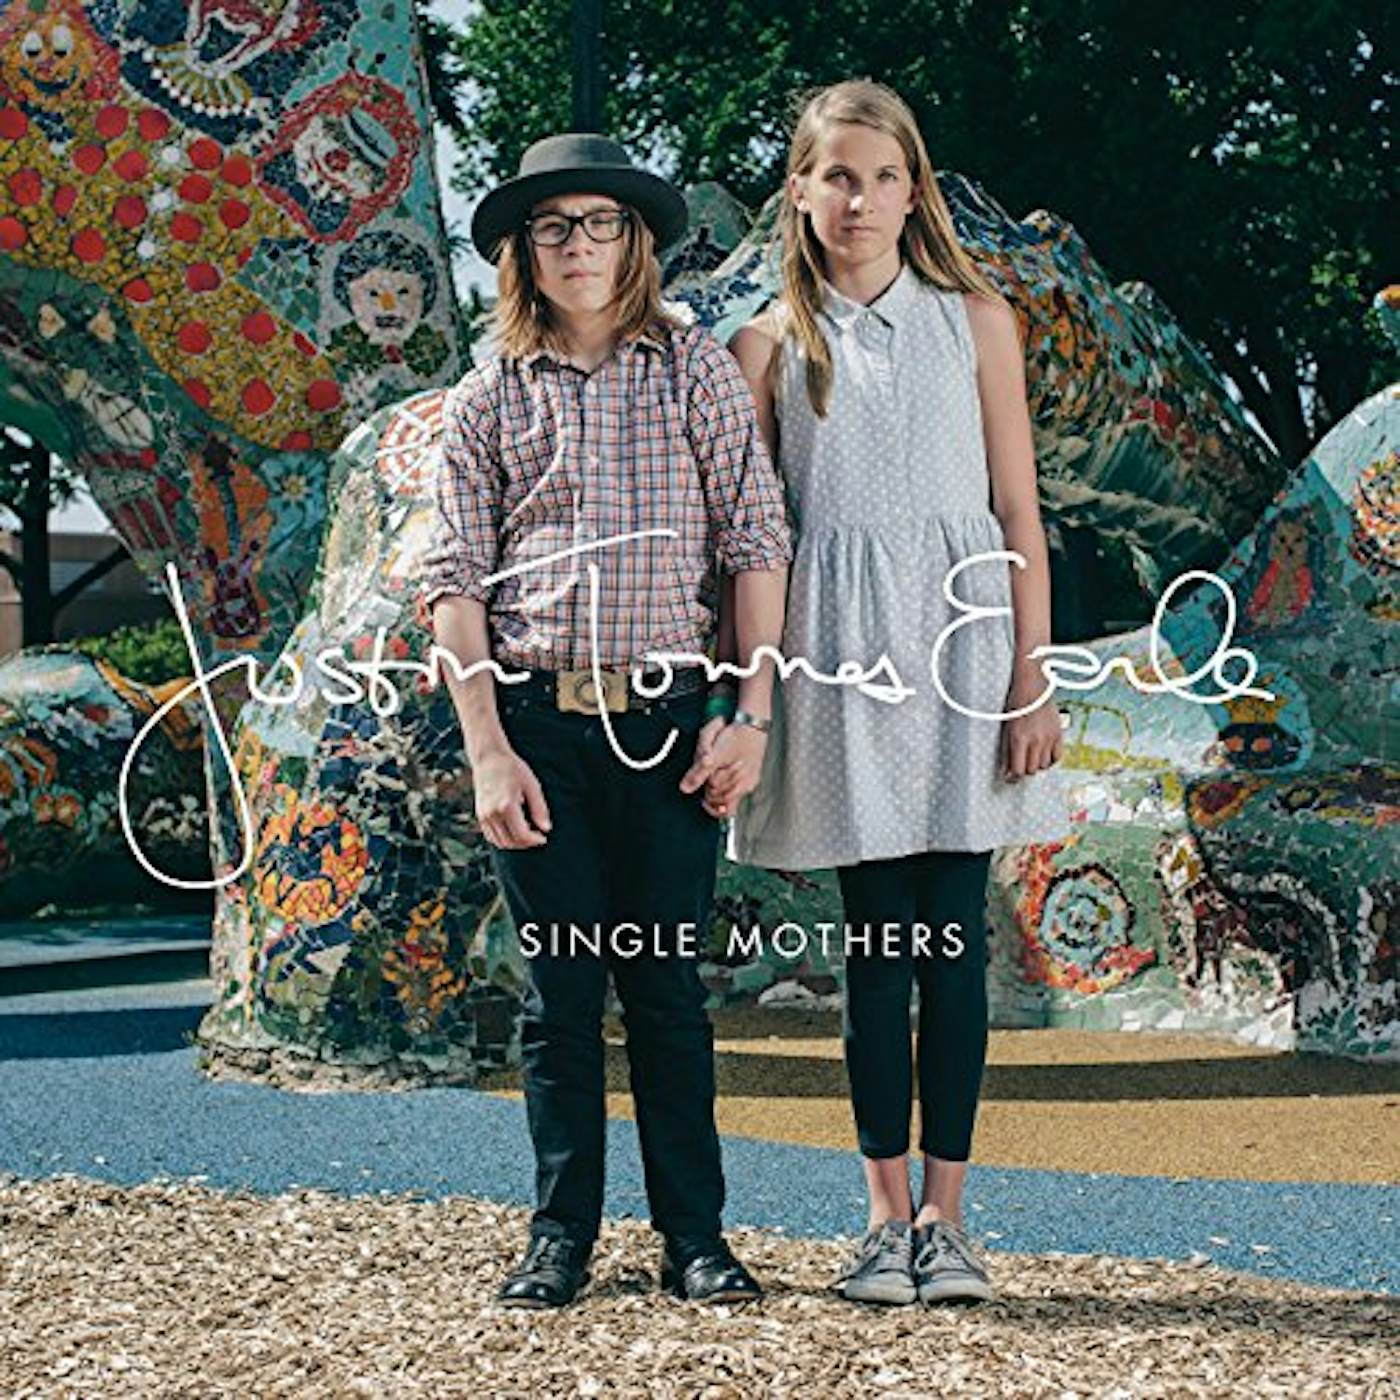 Justin Townes Earle SINGLE MOTHERS CD